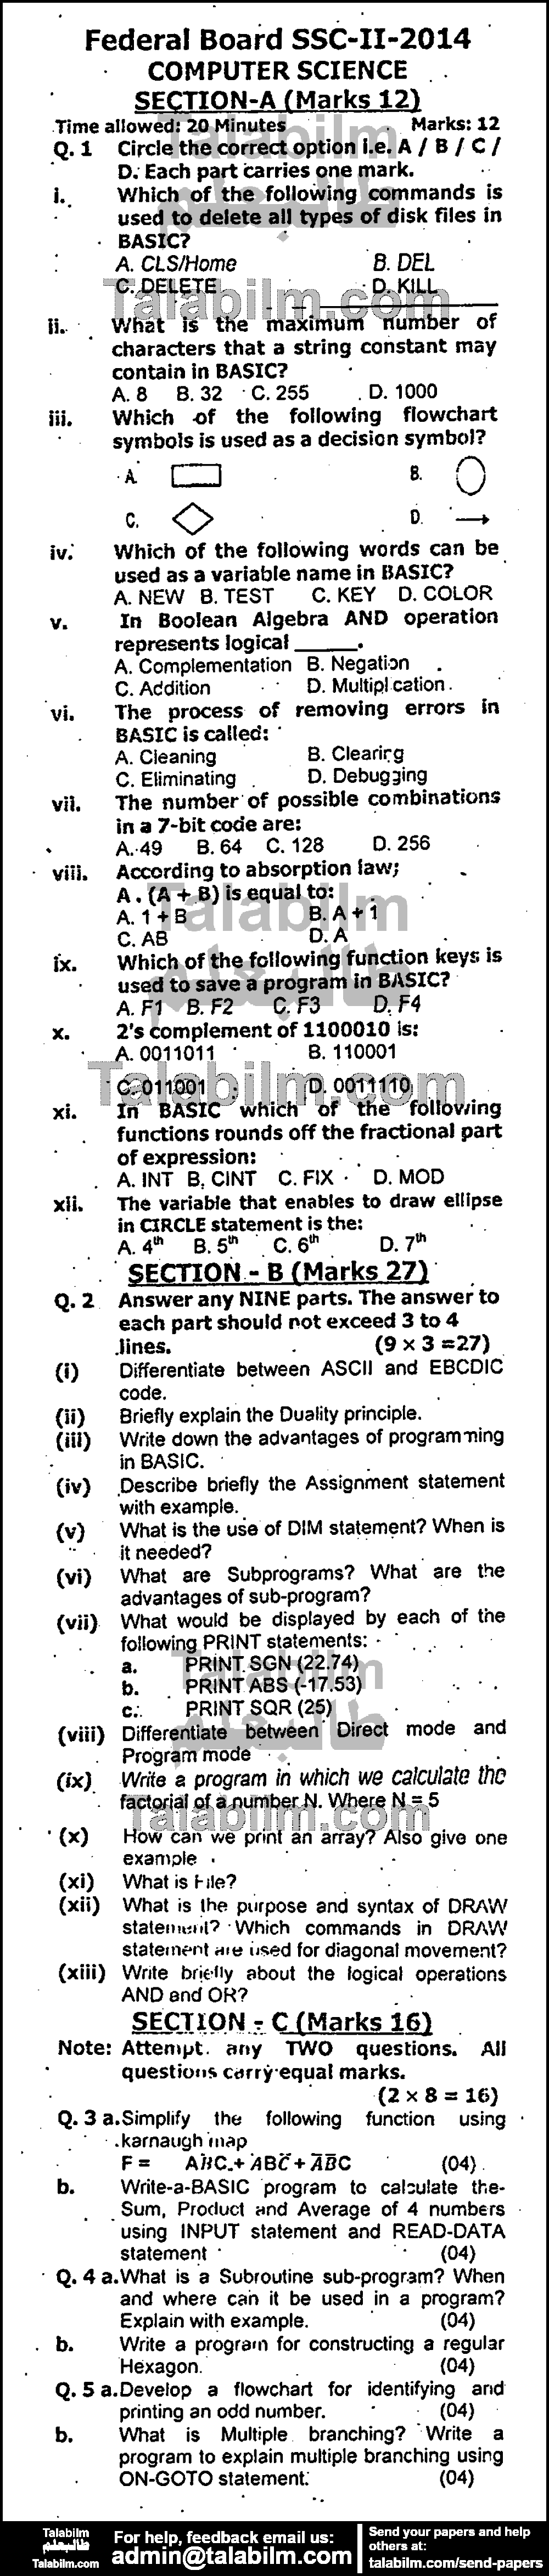 Computer Science 0 past paper for 2014 Group-I